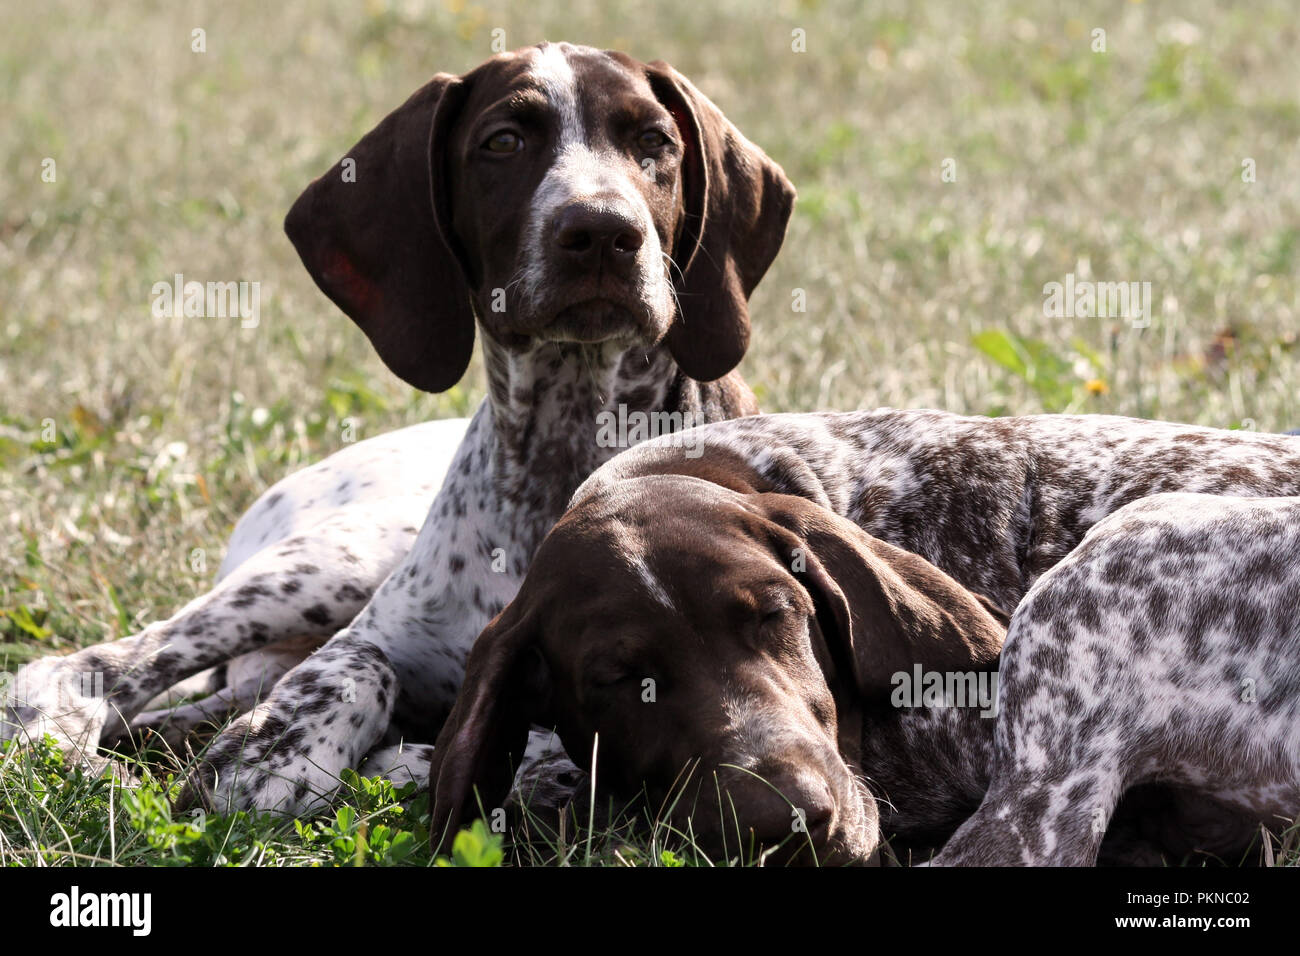 German Shorthaired Pointer German Kurtshaar Two Spotted Little Brown Puppy Dogs Lie On The Grass In The Autumn In The Sun One Animal Sleeps Stock Photo Alamy